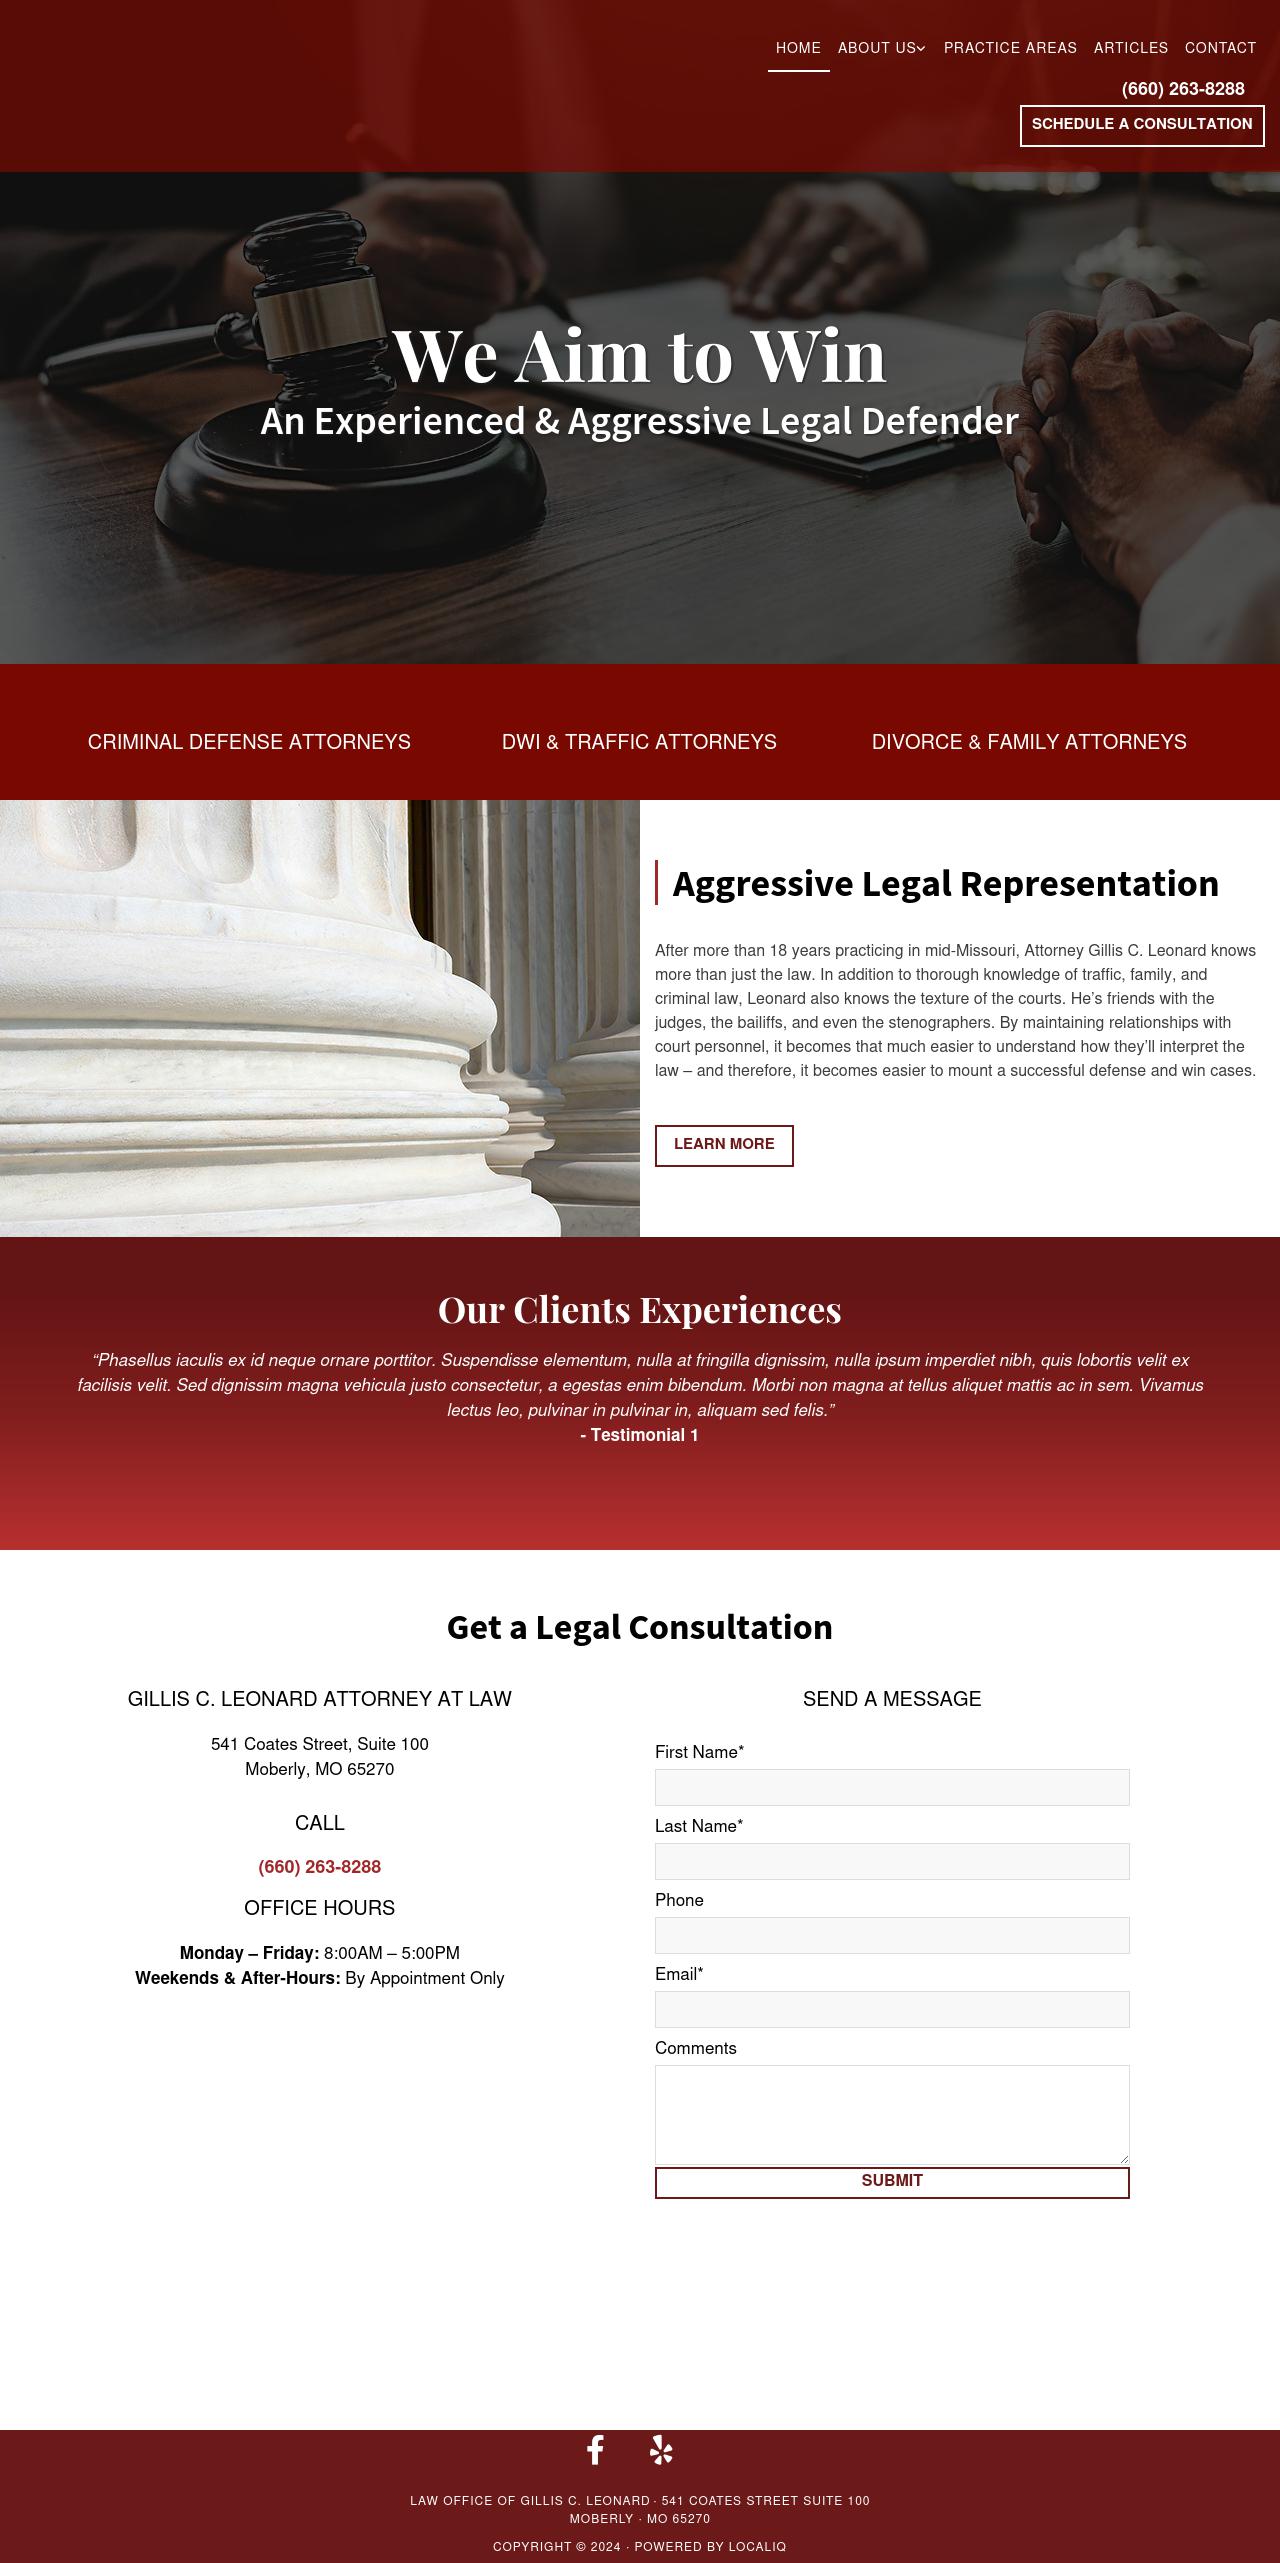 Gillis C Leonard Attorney At Law - Moberly MO Lawyers